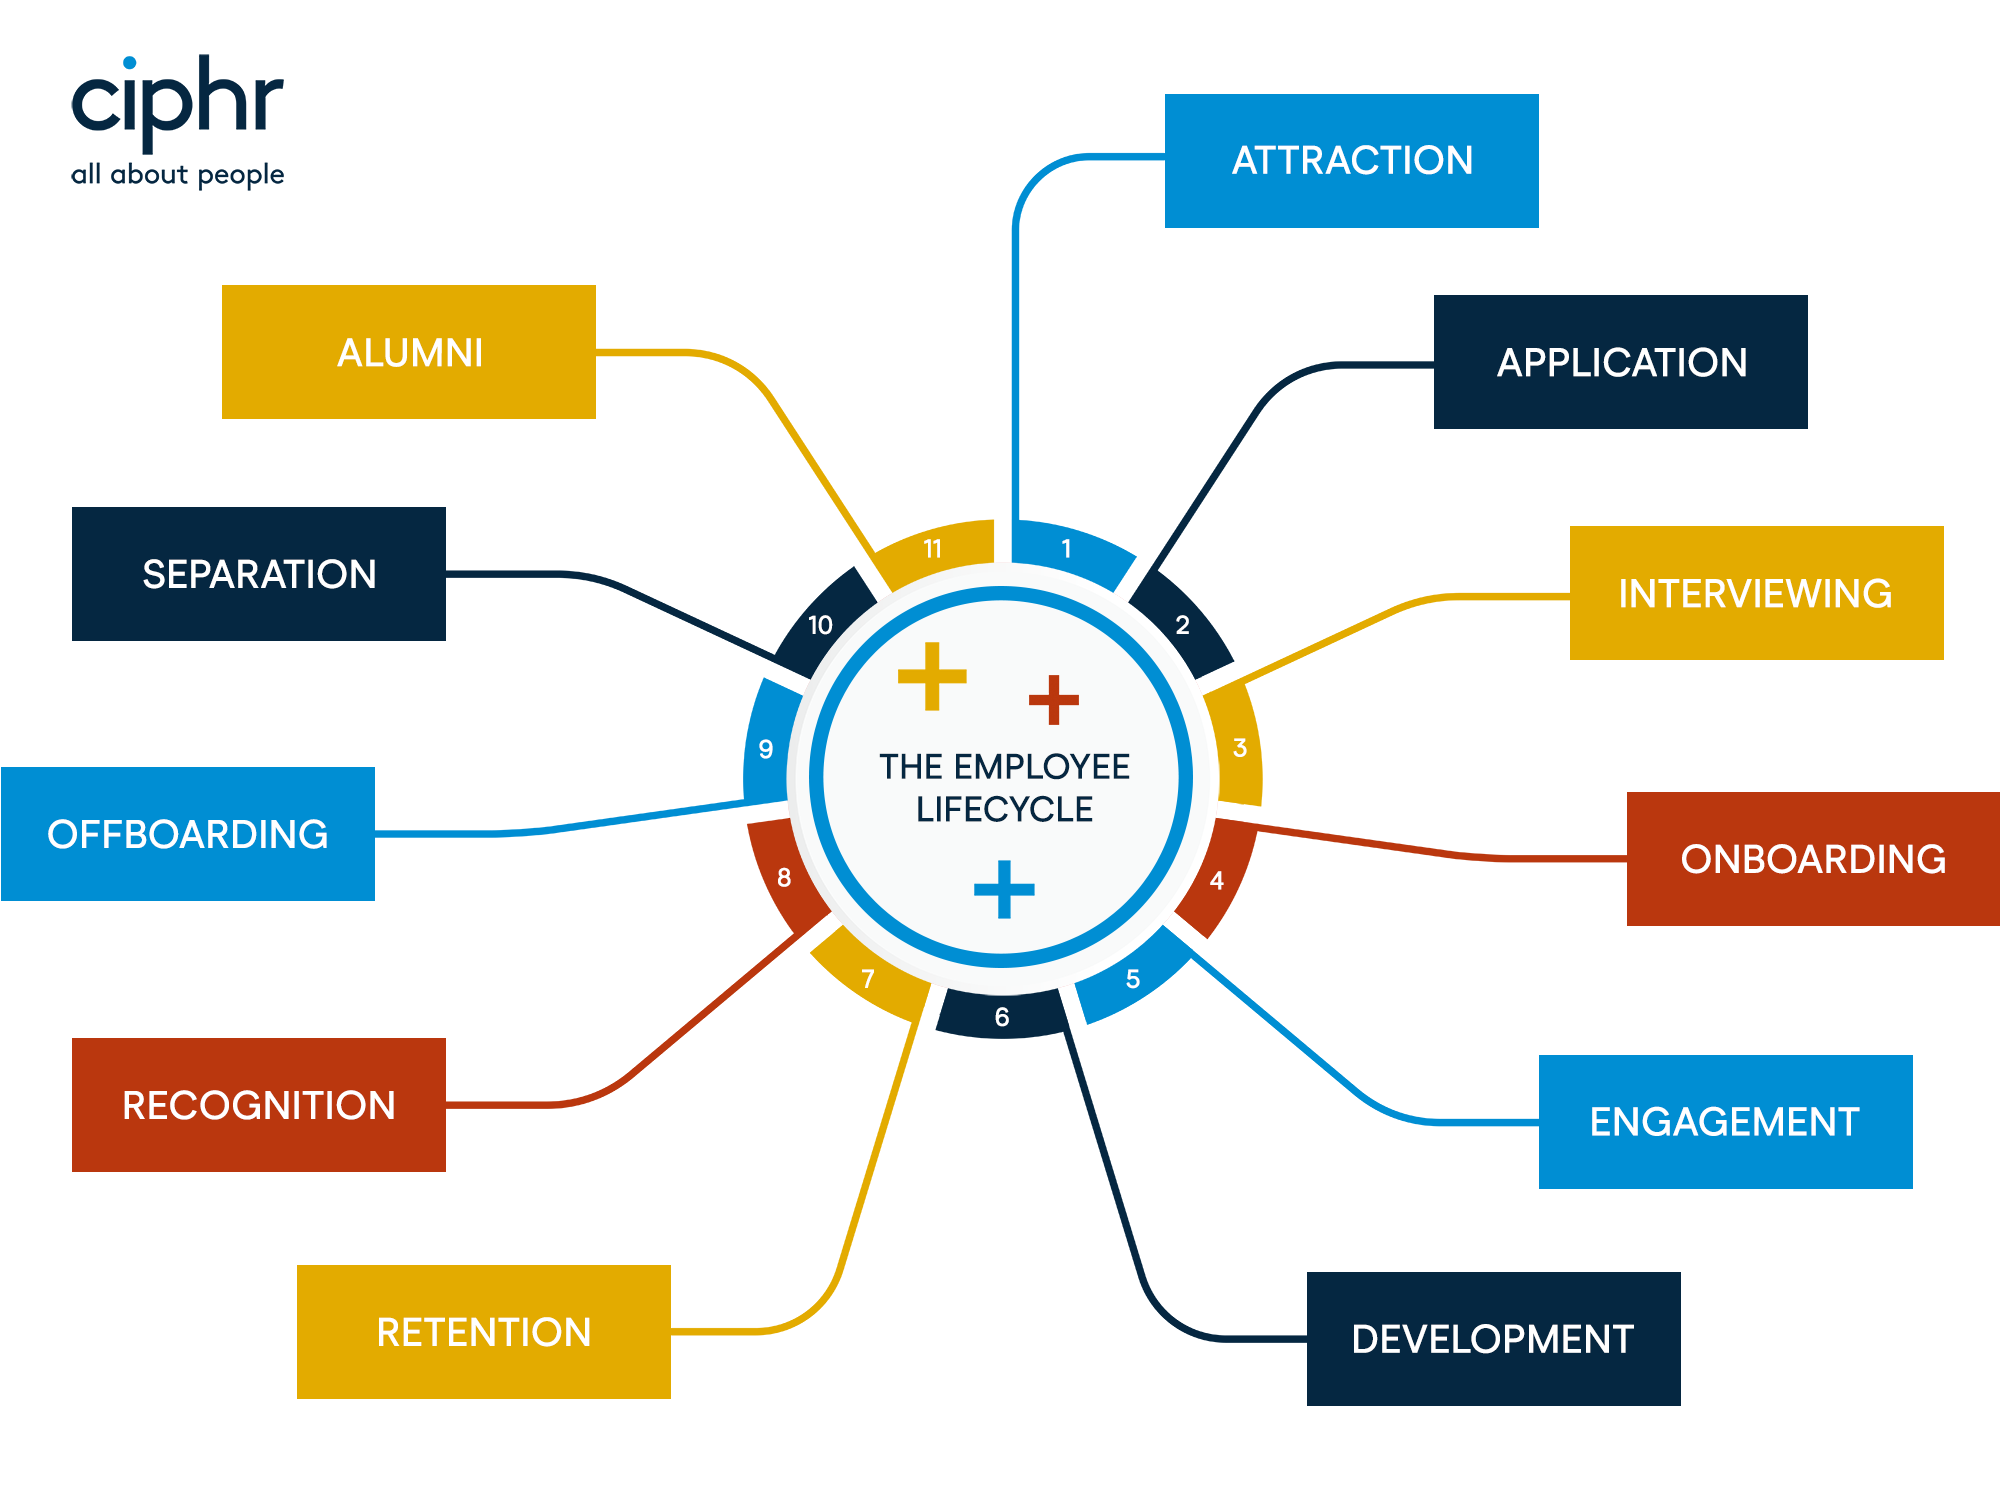 Graphic of the employee lifecycle in Ciphr branded colours. It is made up of 11 steps. In order, they are: attraction, application, interviewing, onboarding, engagement, development, retention, recognition, offboarding, separation and alumni.